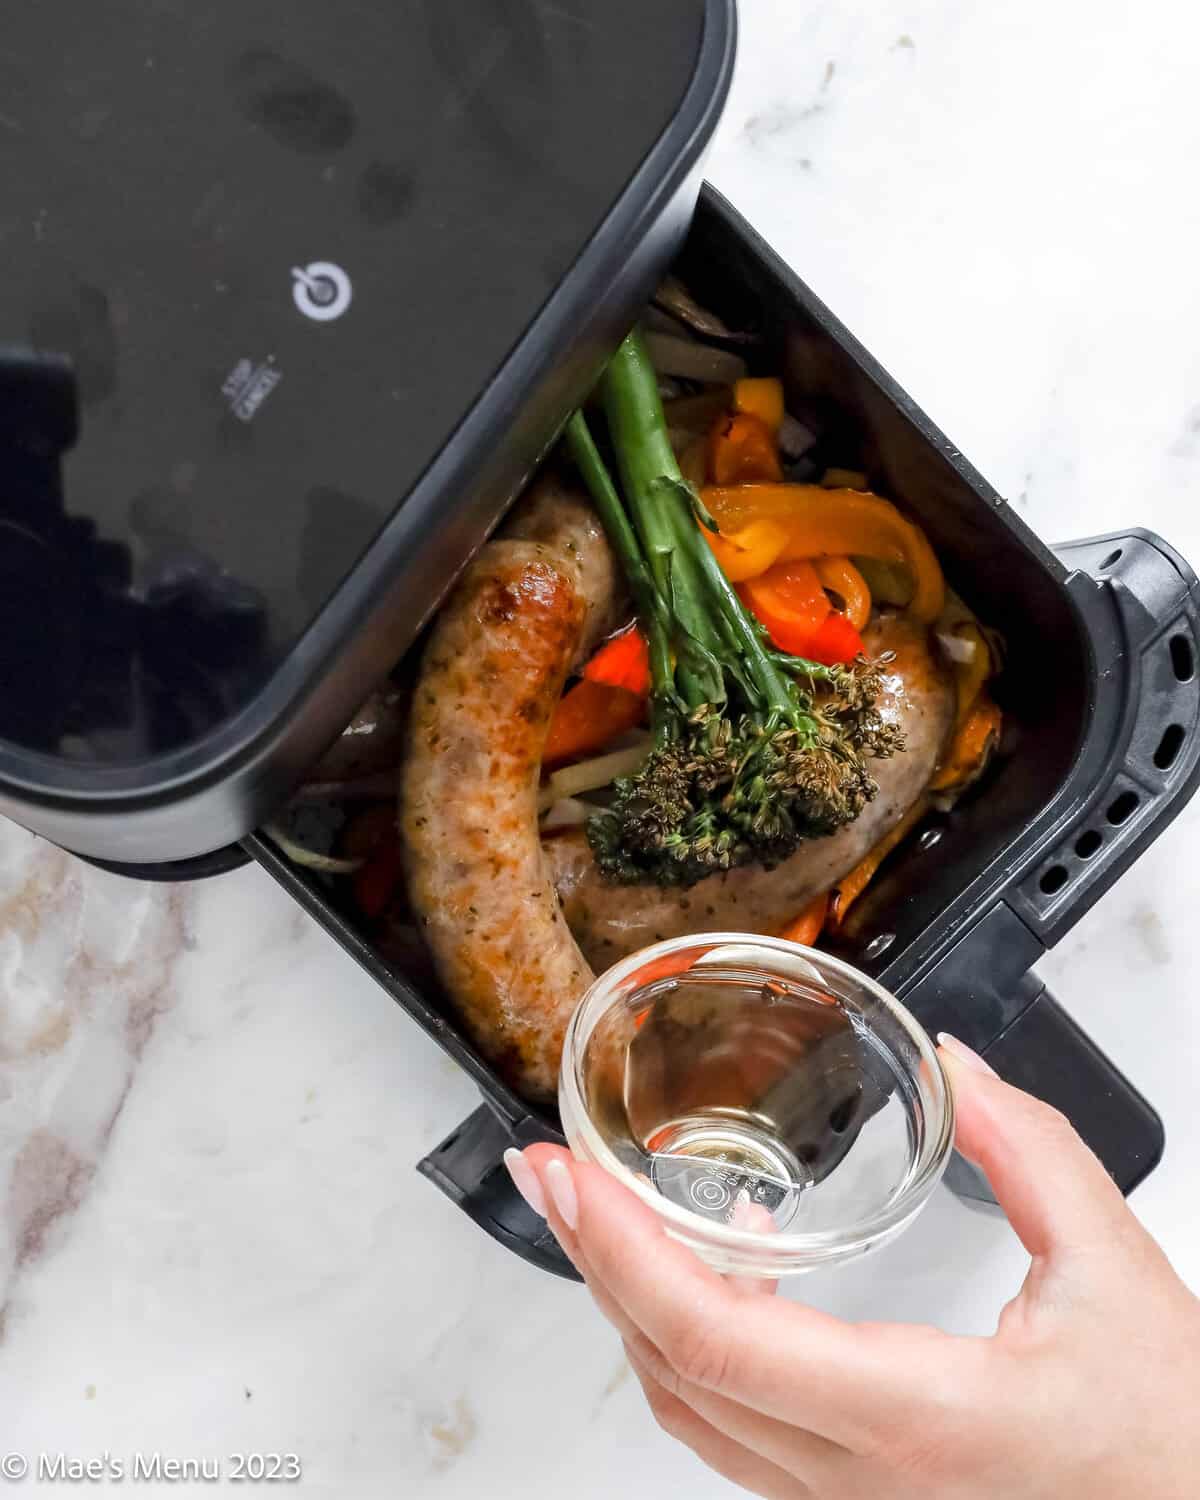 Drizzling the air fryer sausage, peppers, and broccolini, with white wine vinegar.